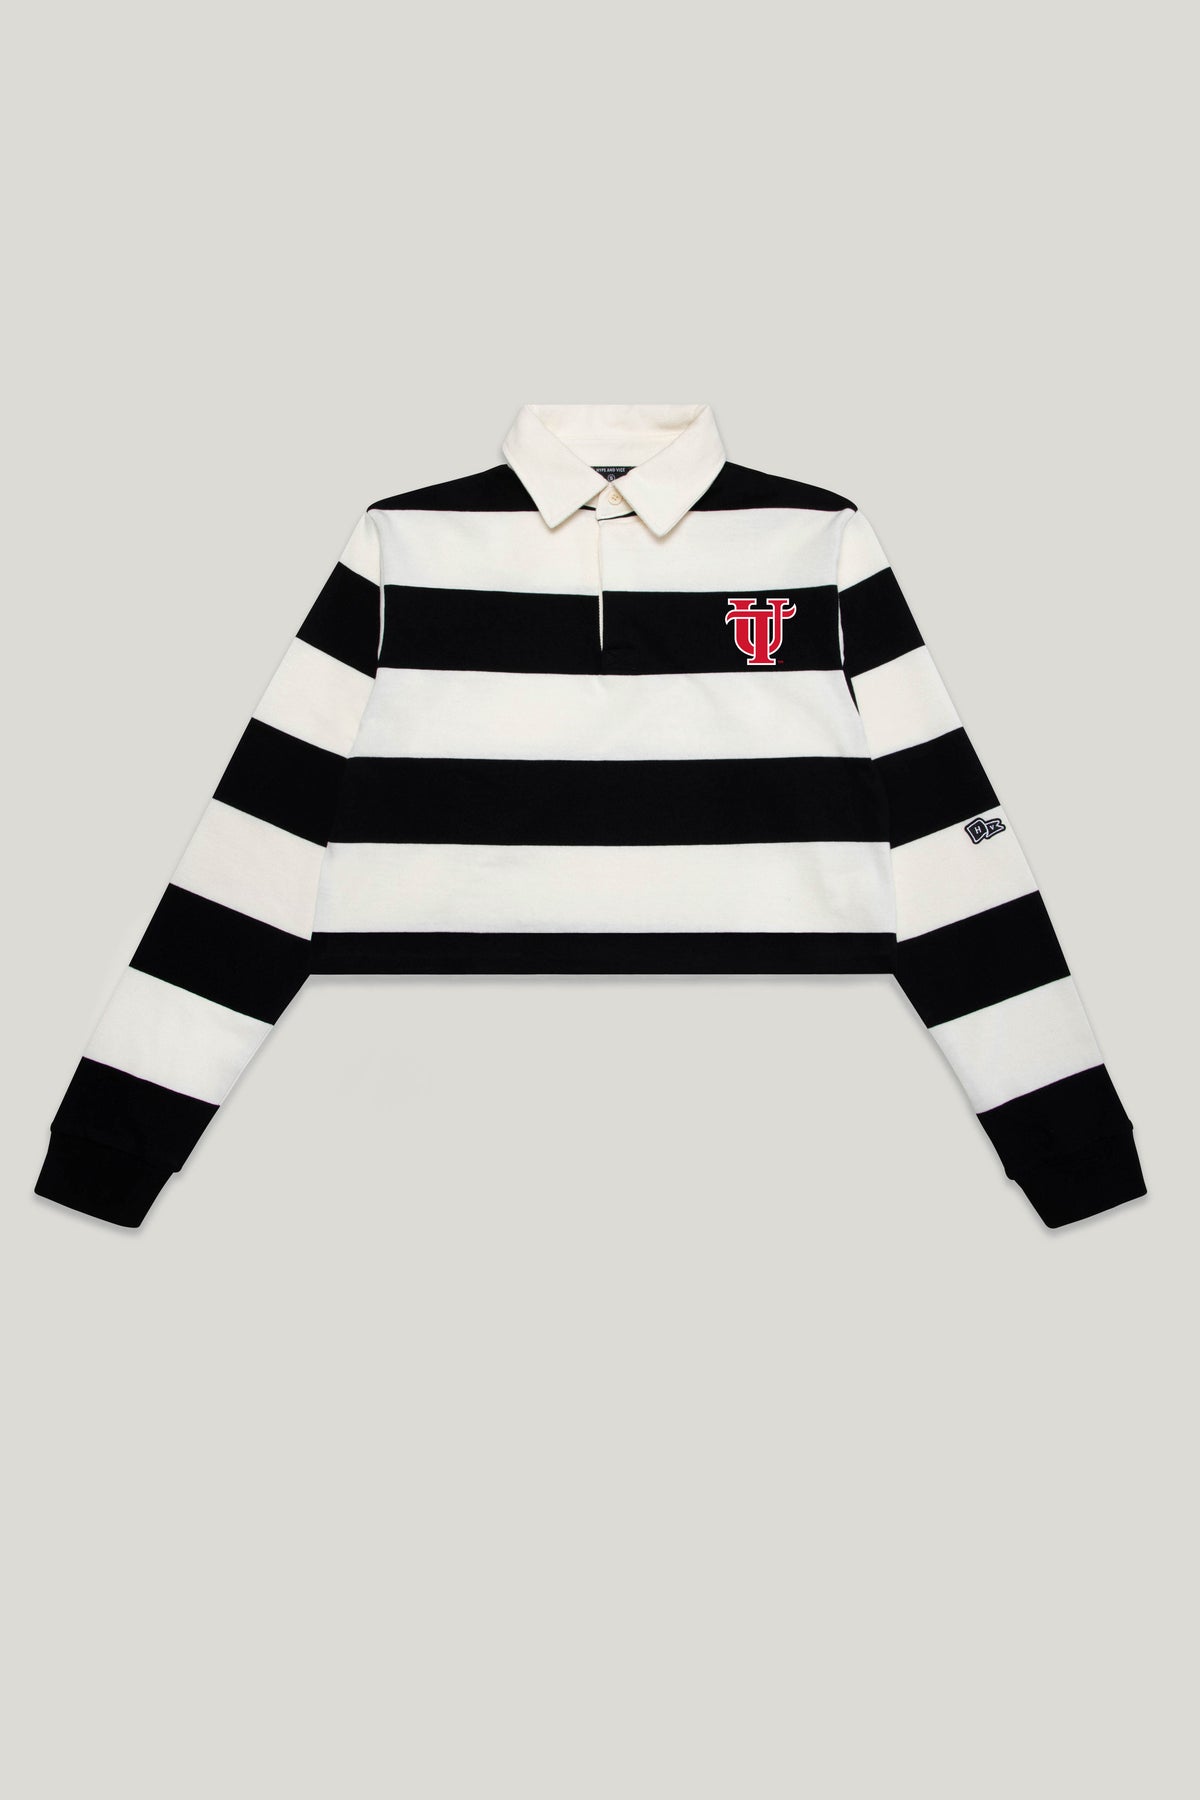 University of Tampa Rugby Top